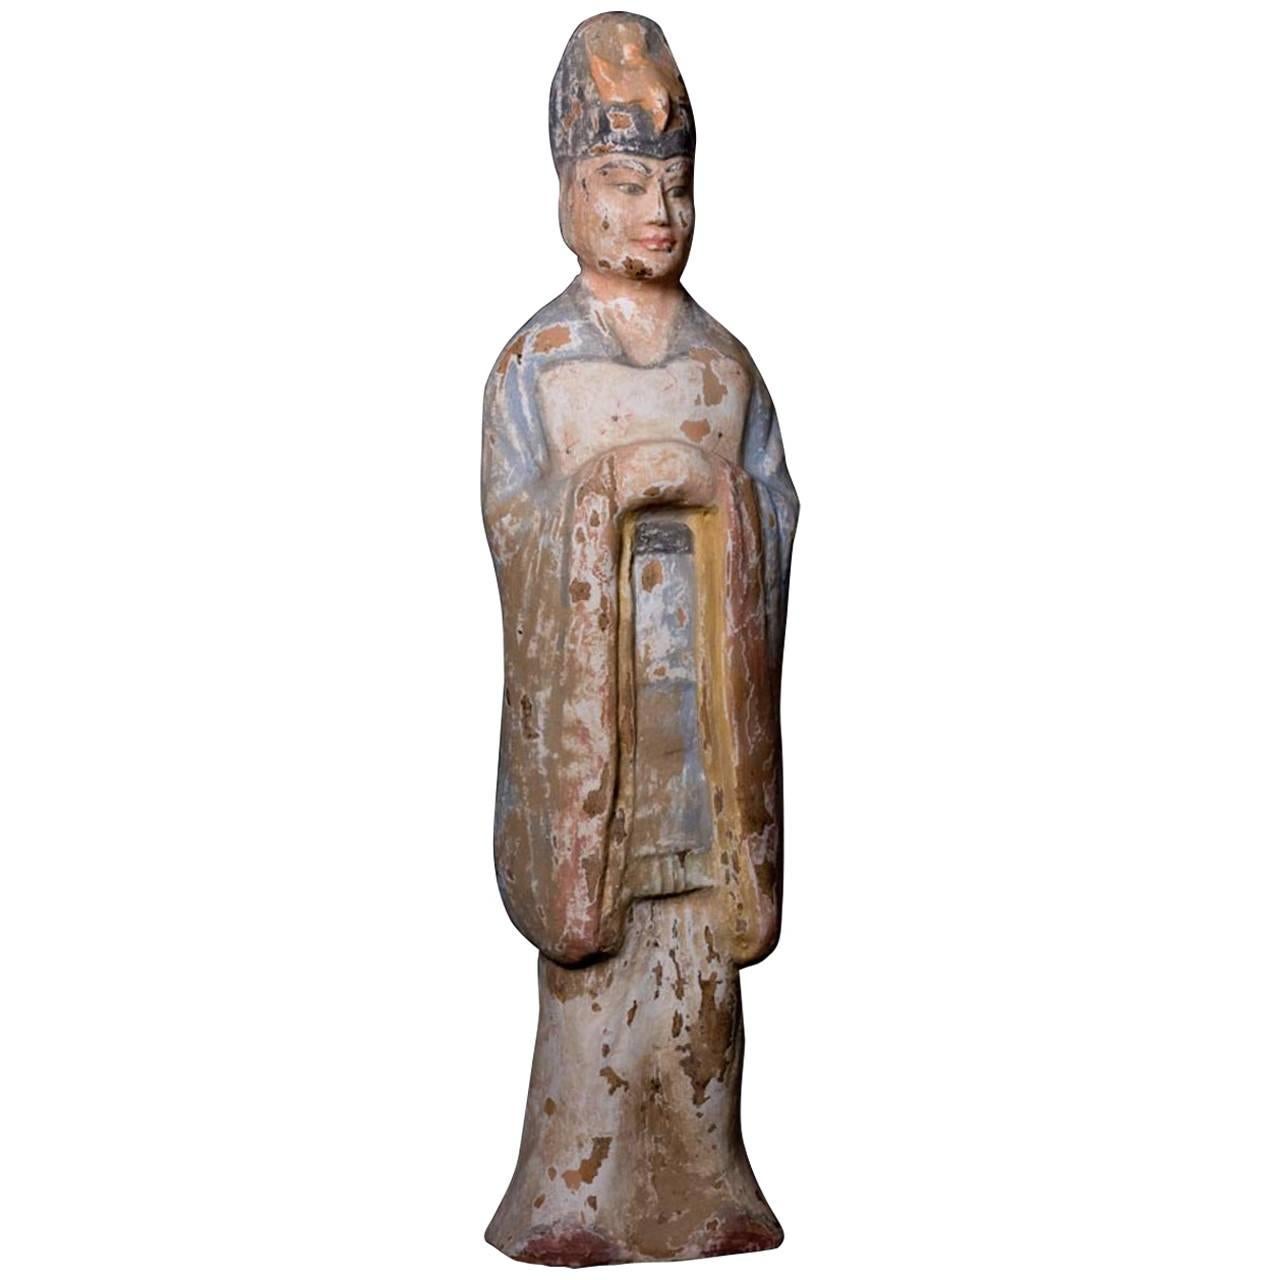 Very Elegant Tang Dynasty Dignitary in Orange Terracotta, China '618-907 AD' For Sale